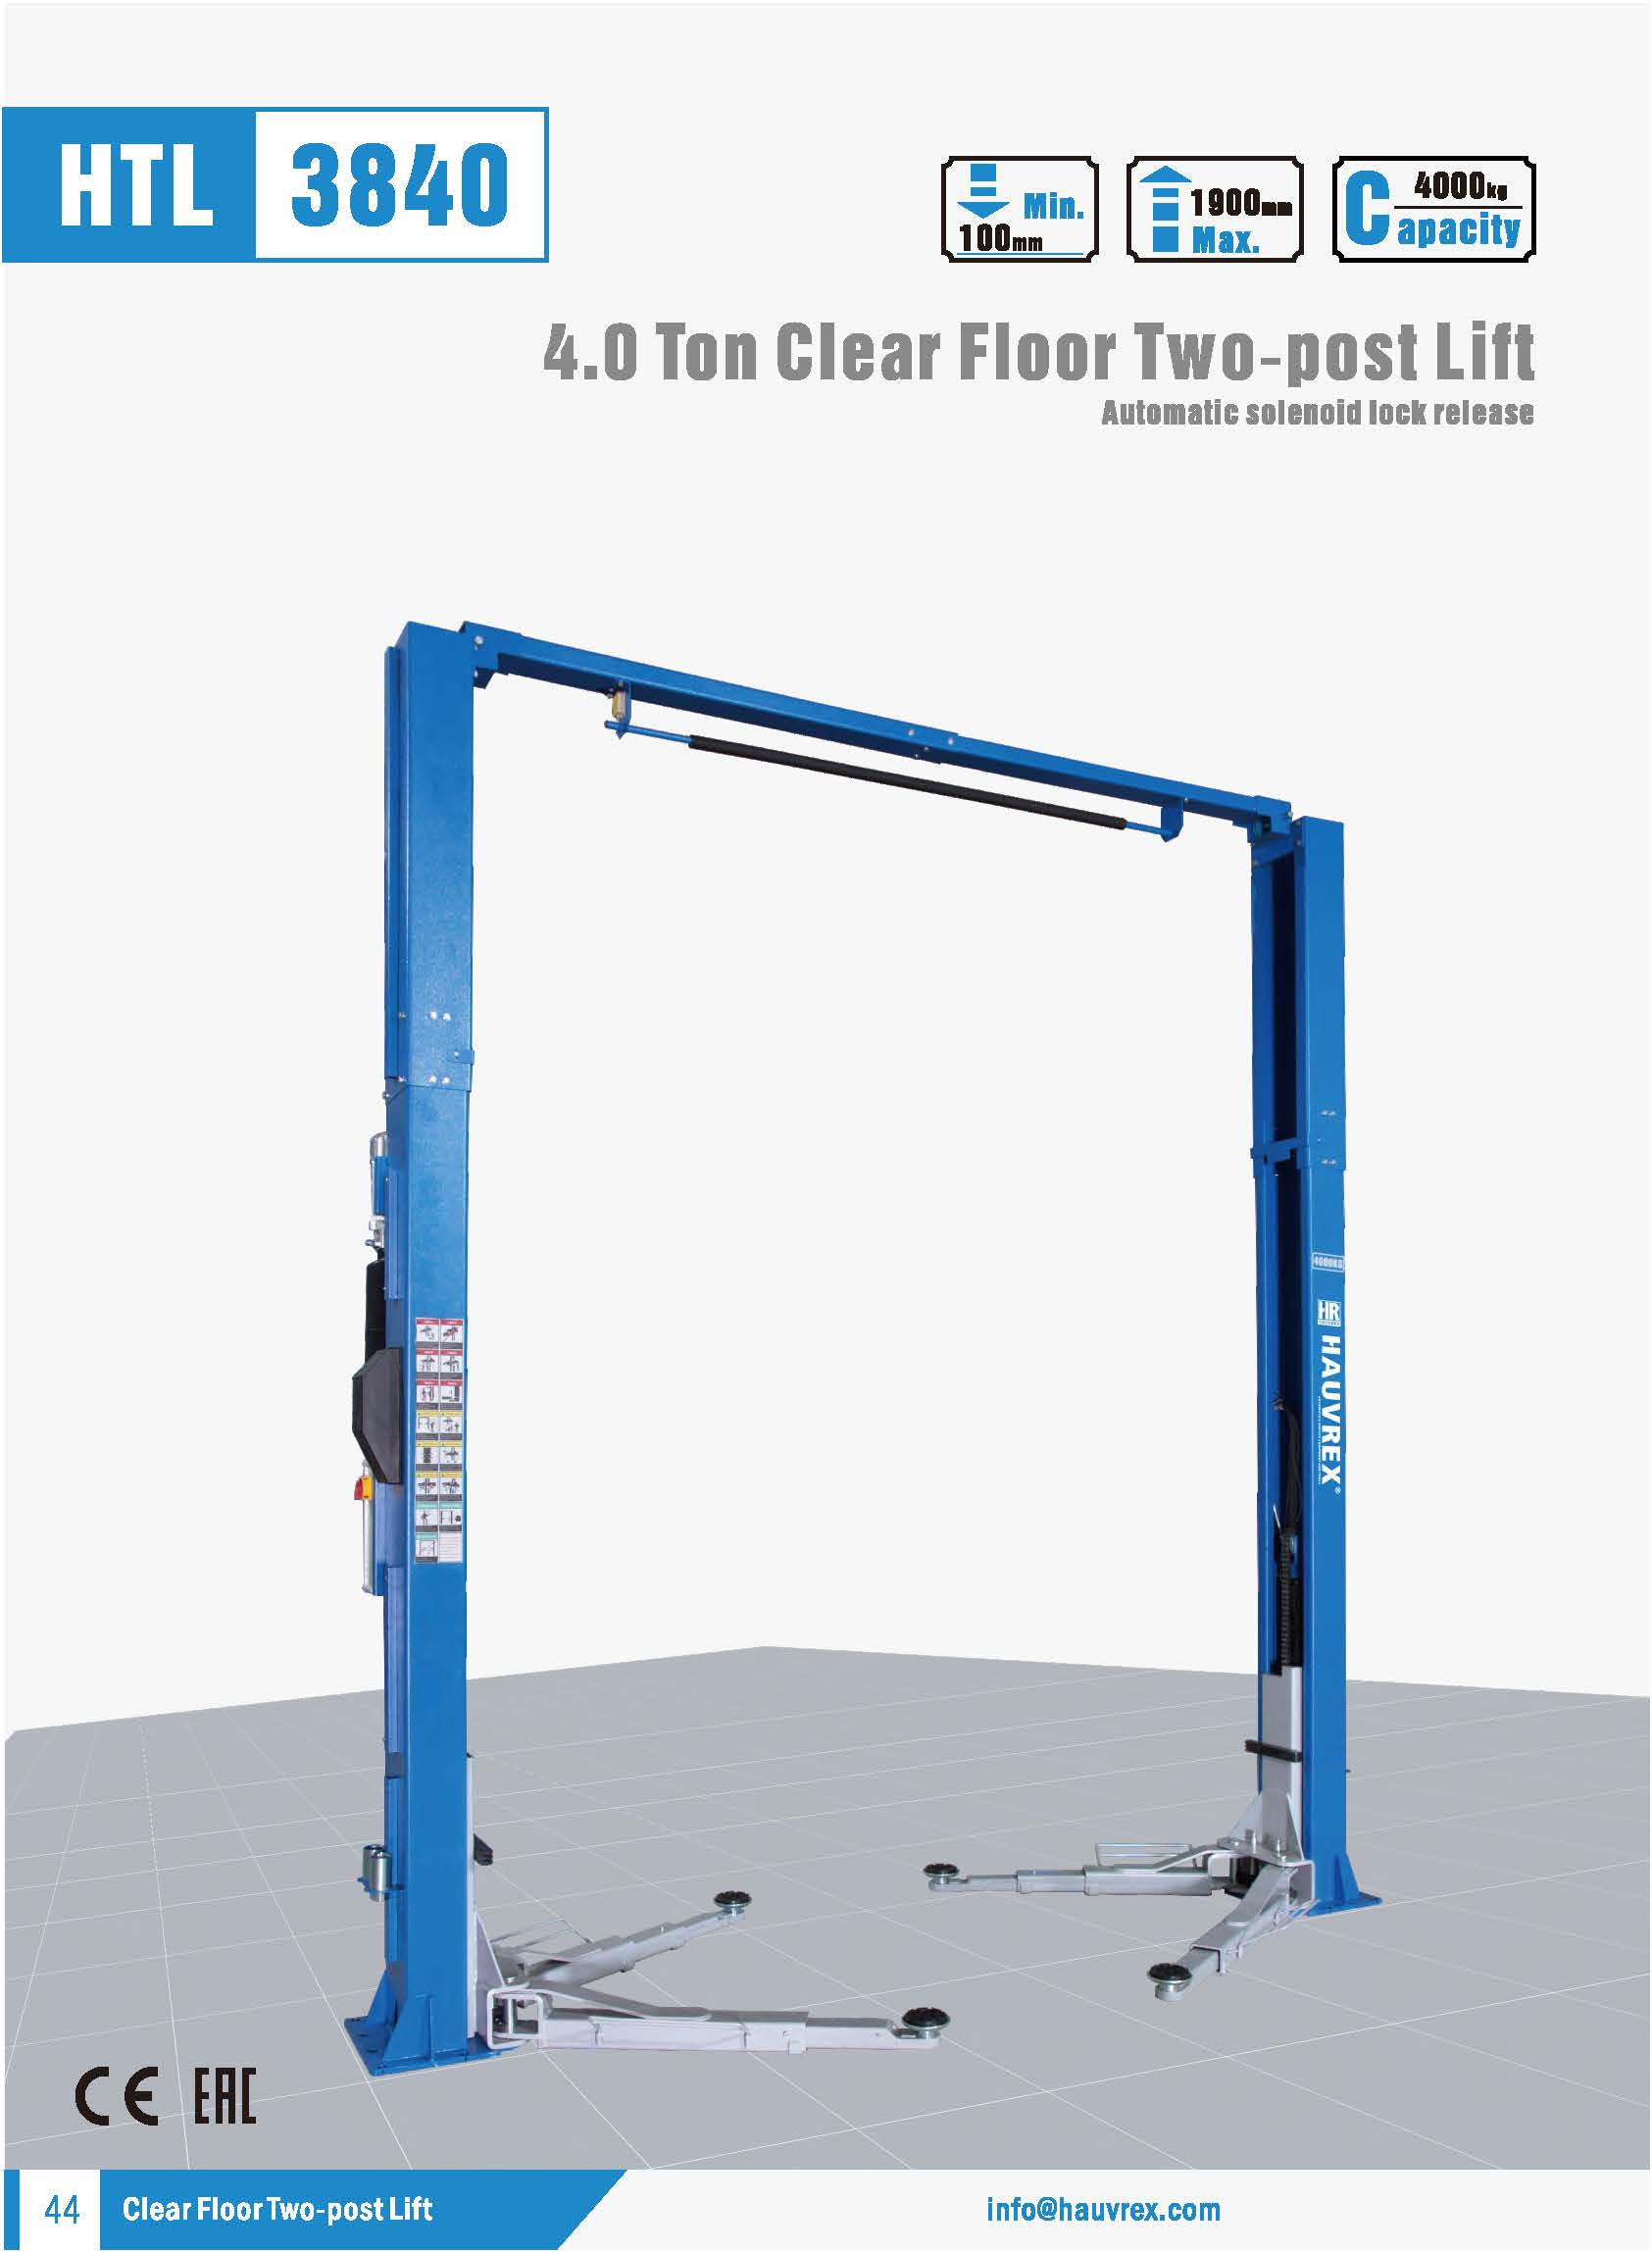 HTL3840 Two-post Lift